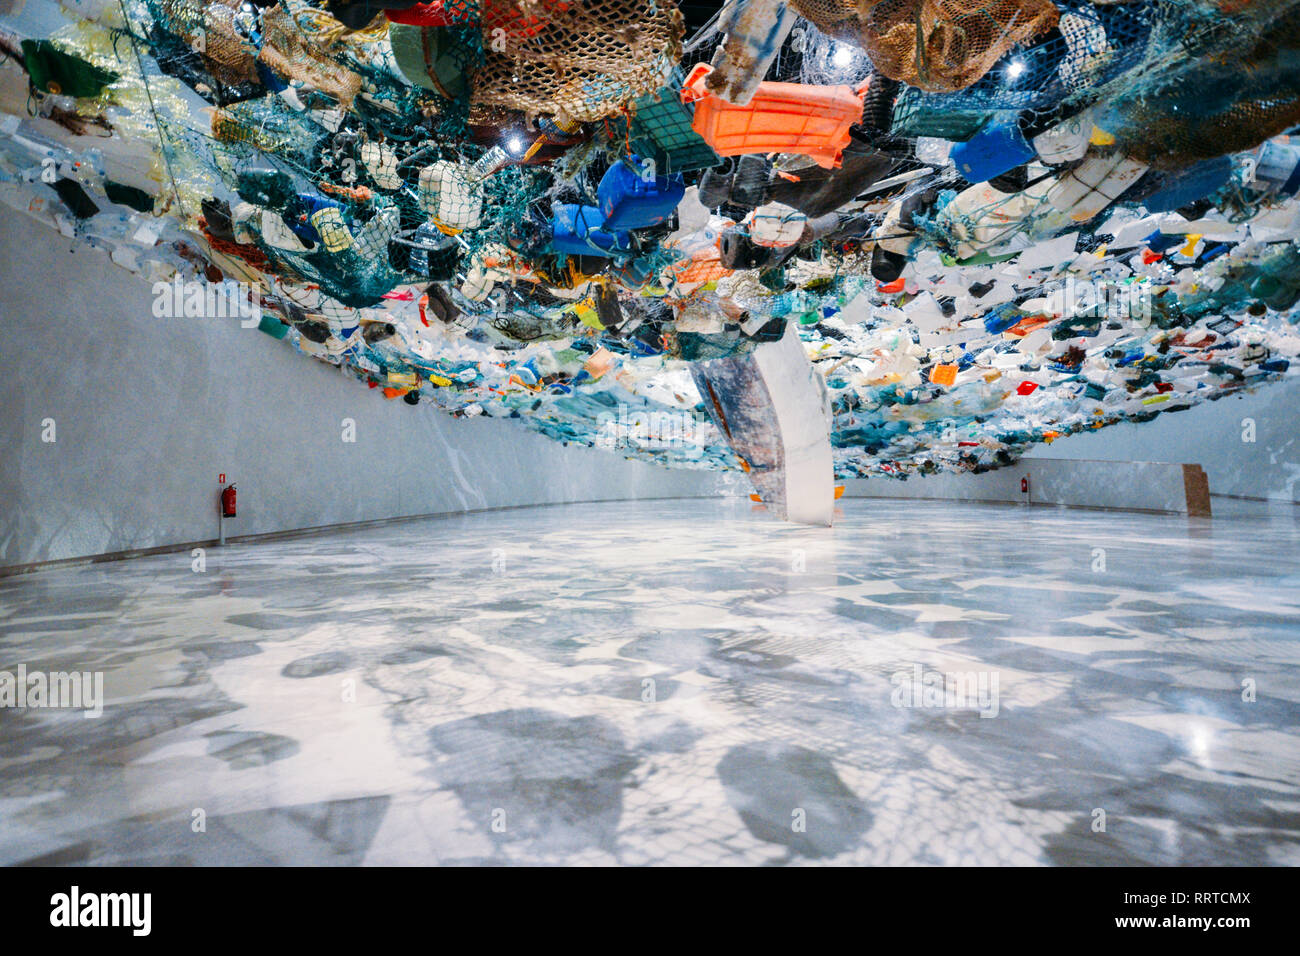 Paris-based artist Tadashi Kawamata has created a monumental installation of ocean plastic in the Oval Gallery of Lisbon's Museum of Art, Architecture Stock Photo